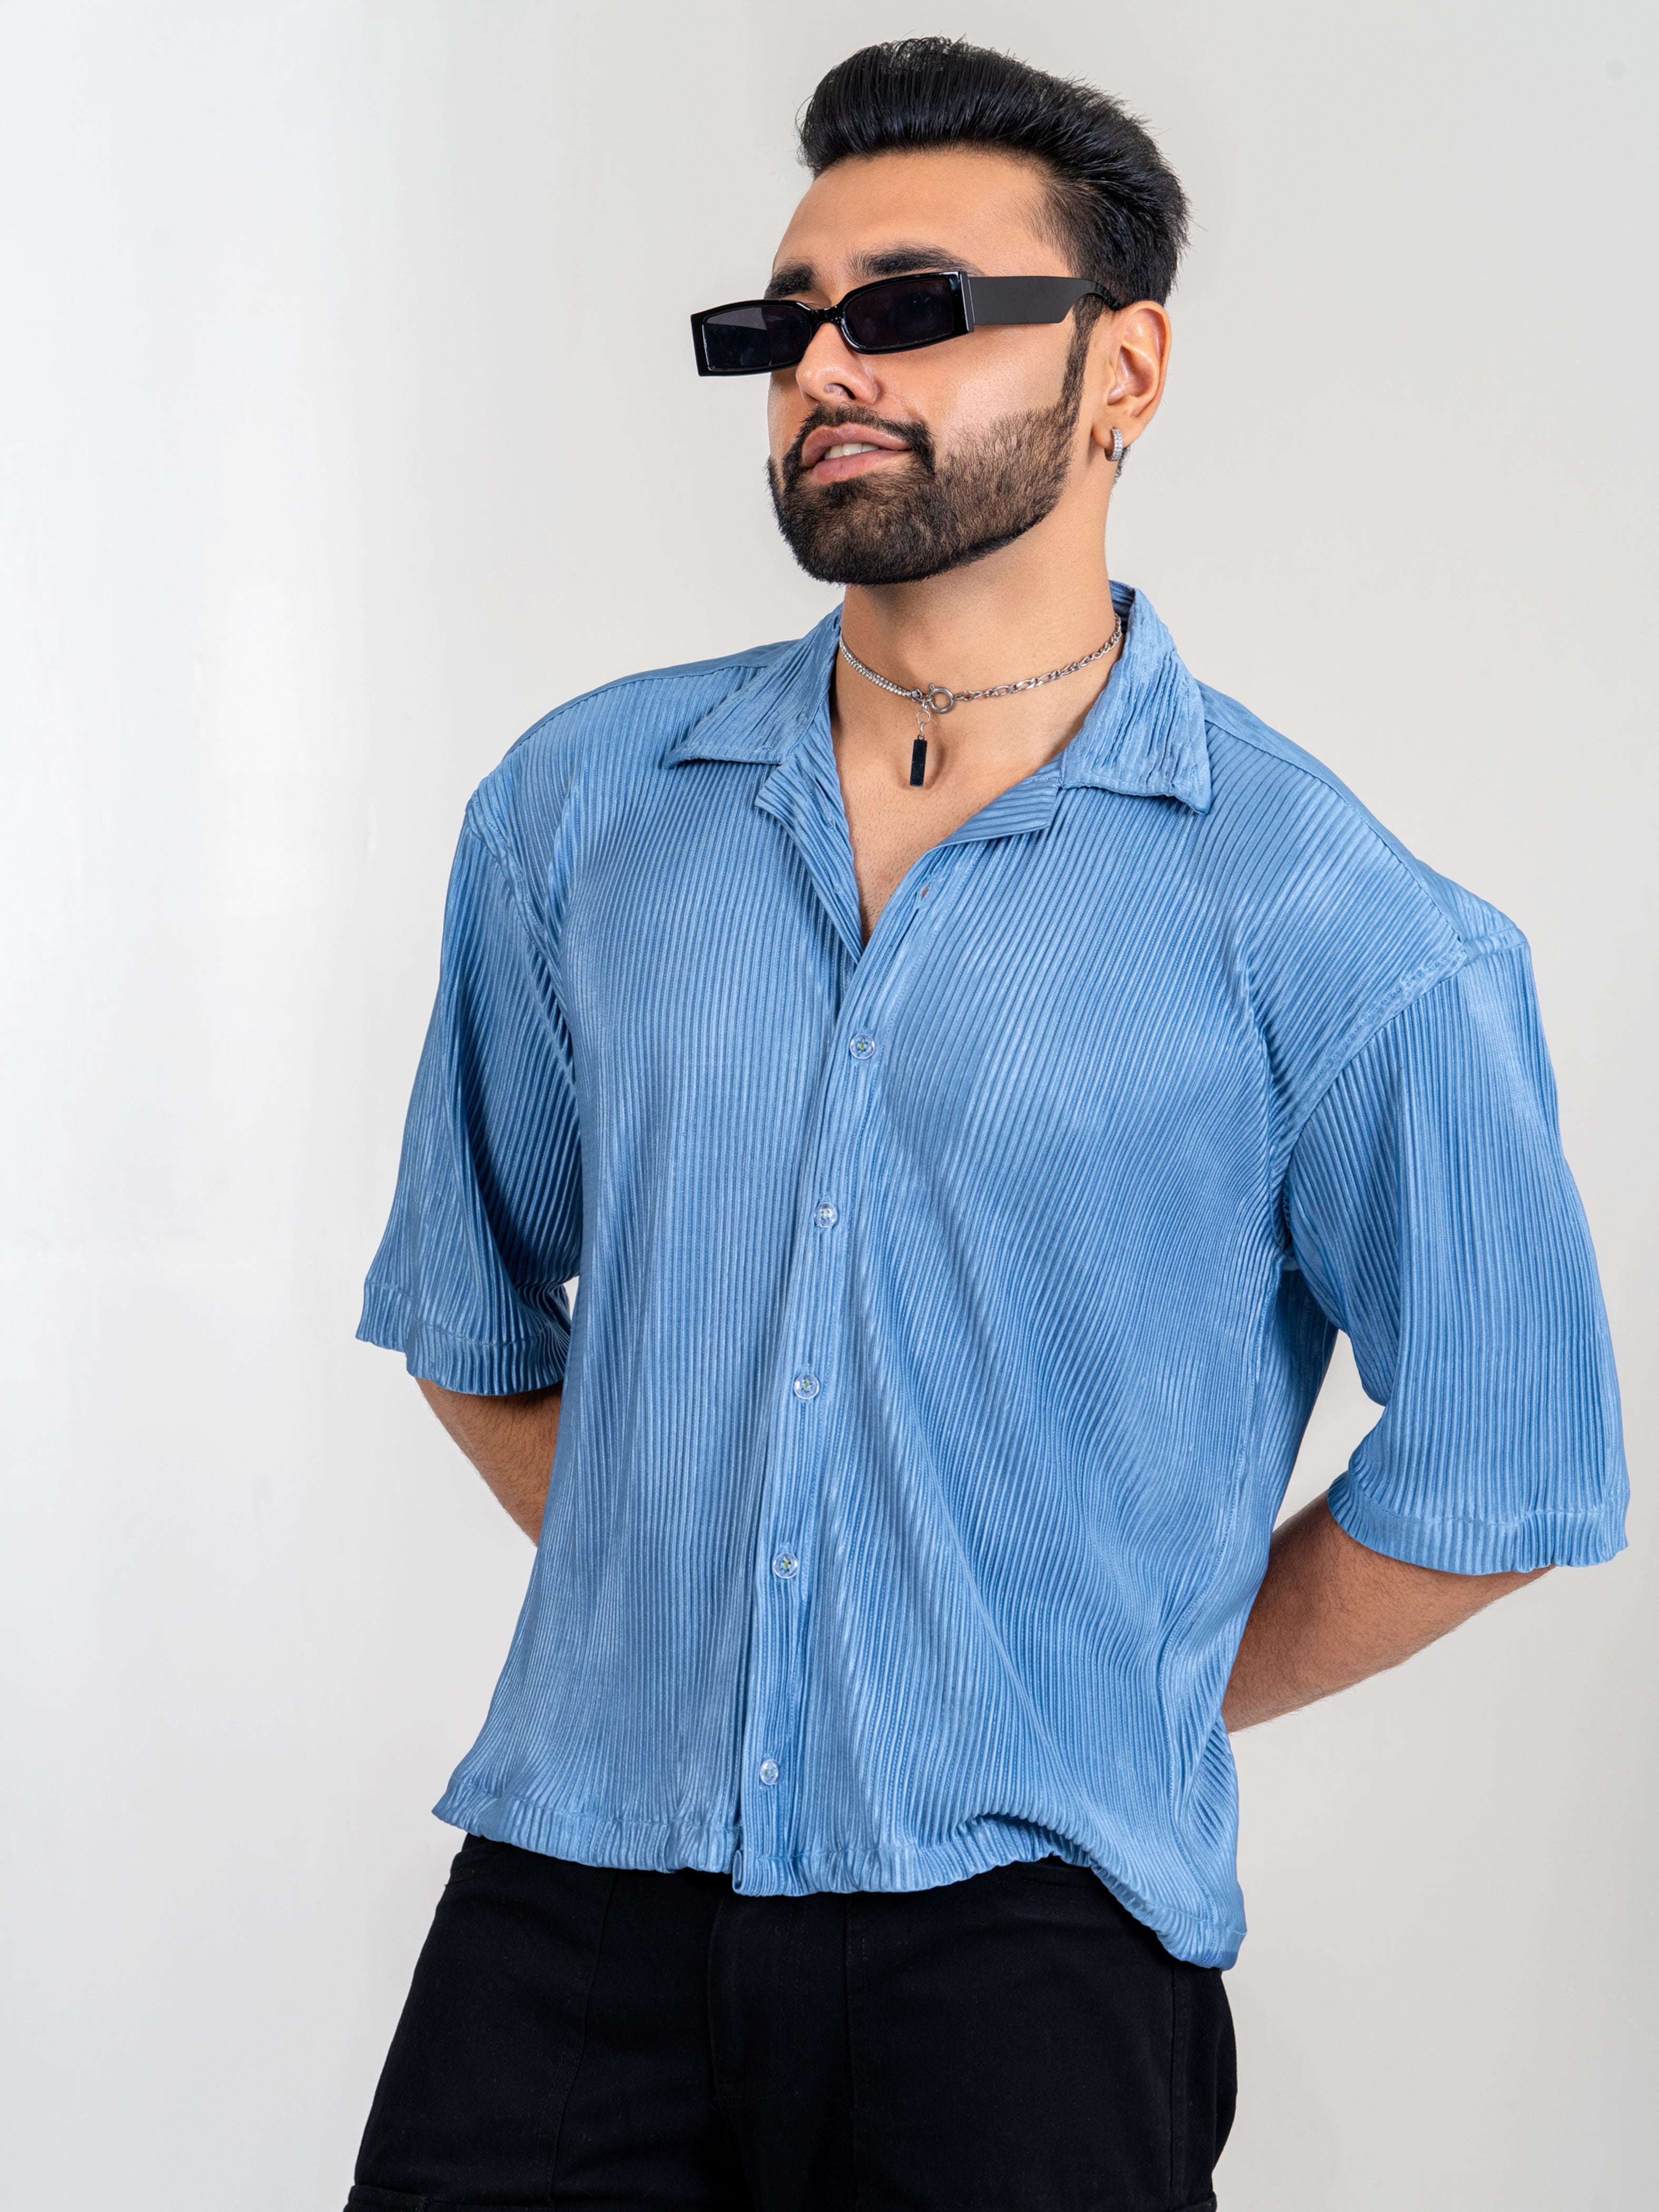 Firangi Yarn Pleat Creased Oversized Cropped Shirt with Camp Collar - Teal Blue Chrome